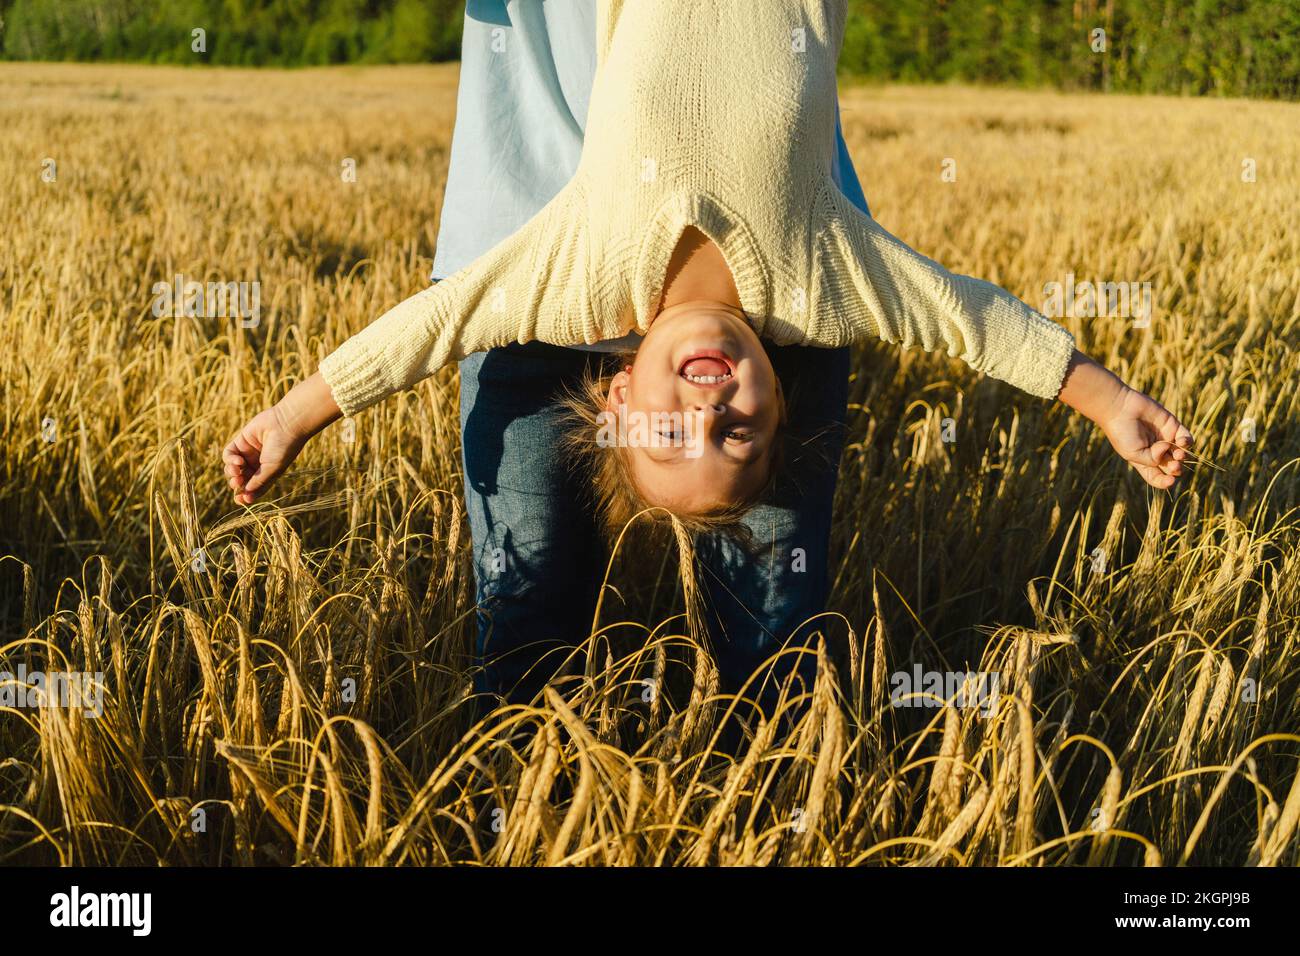 Playful girl with arms outstretched hanging upside down in front of father at field Stock Photo